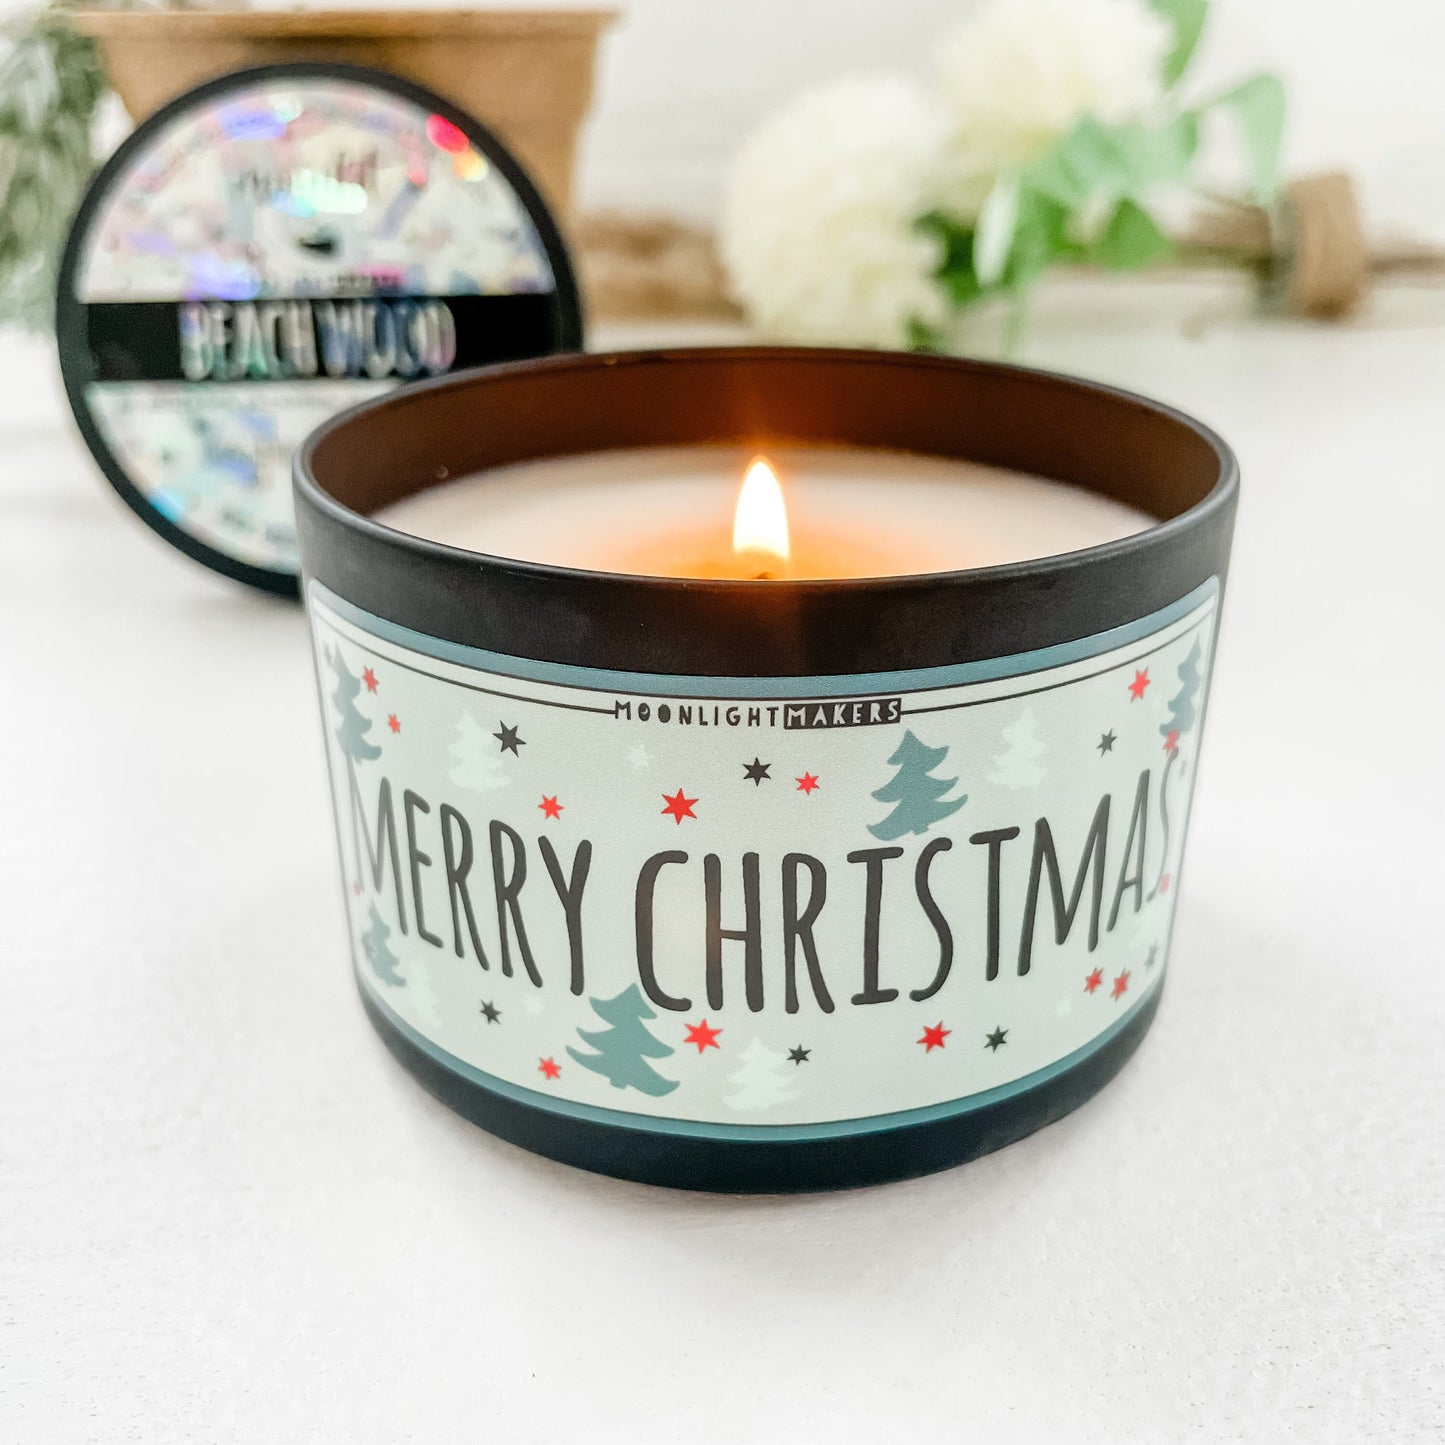 Merry Christmas - 8oz Candle - Choose Your Scent - 100% Natural Soy Wax